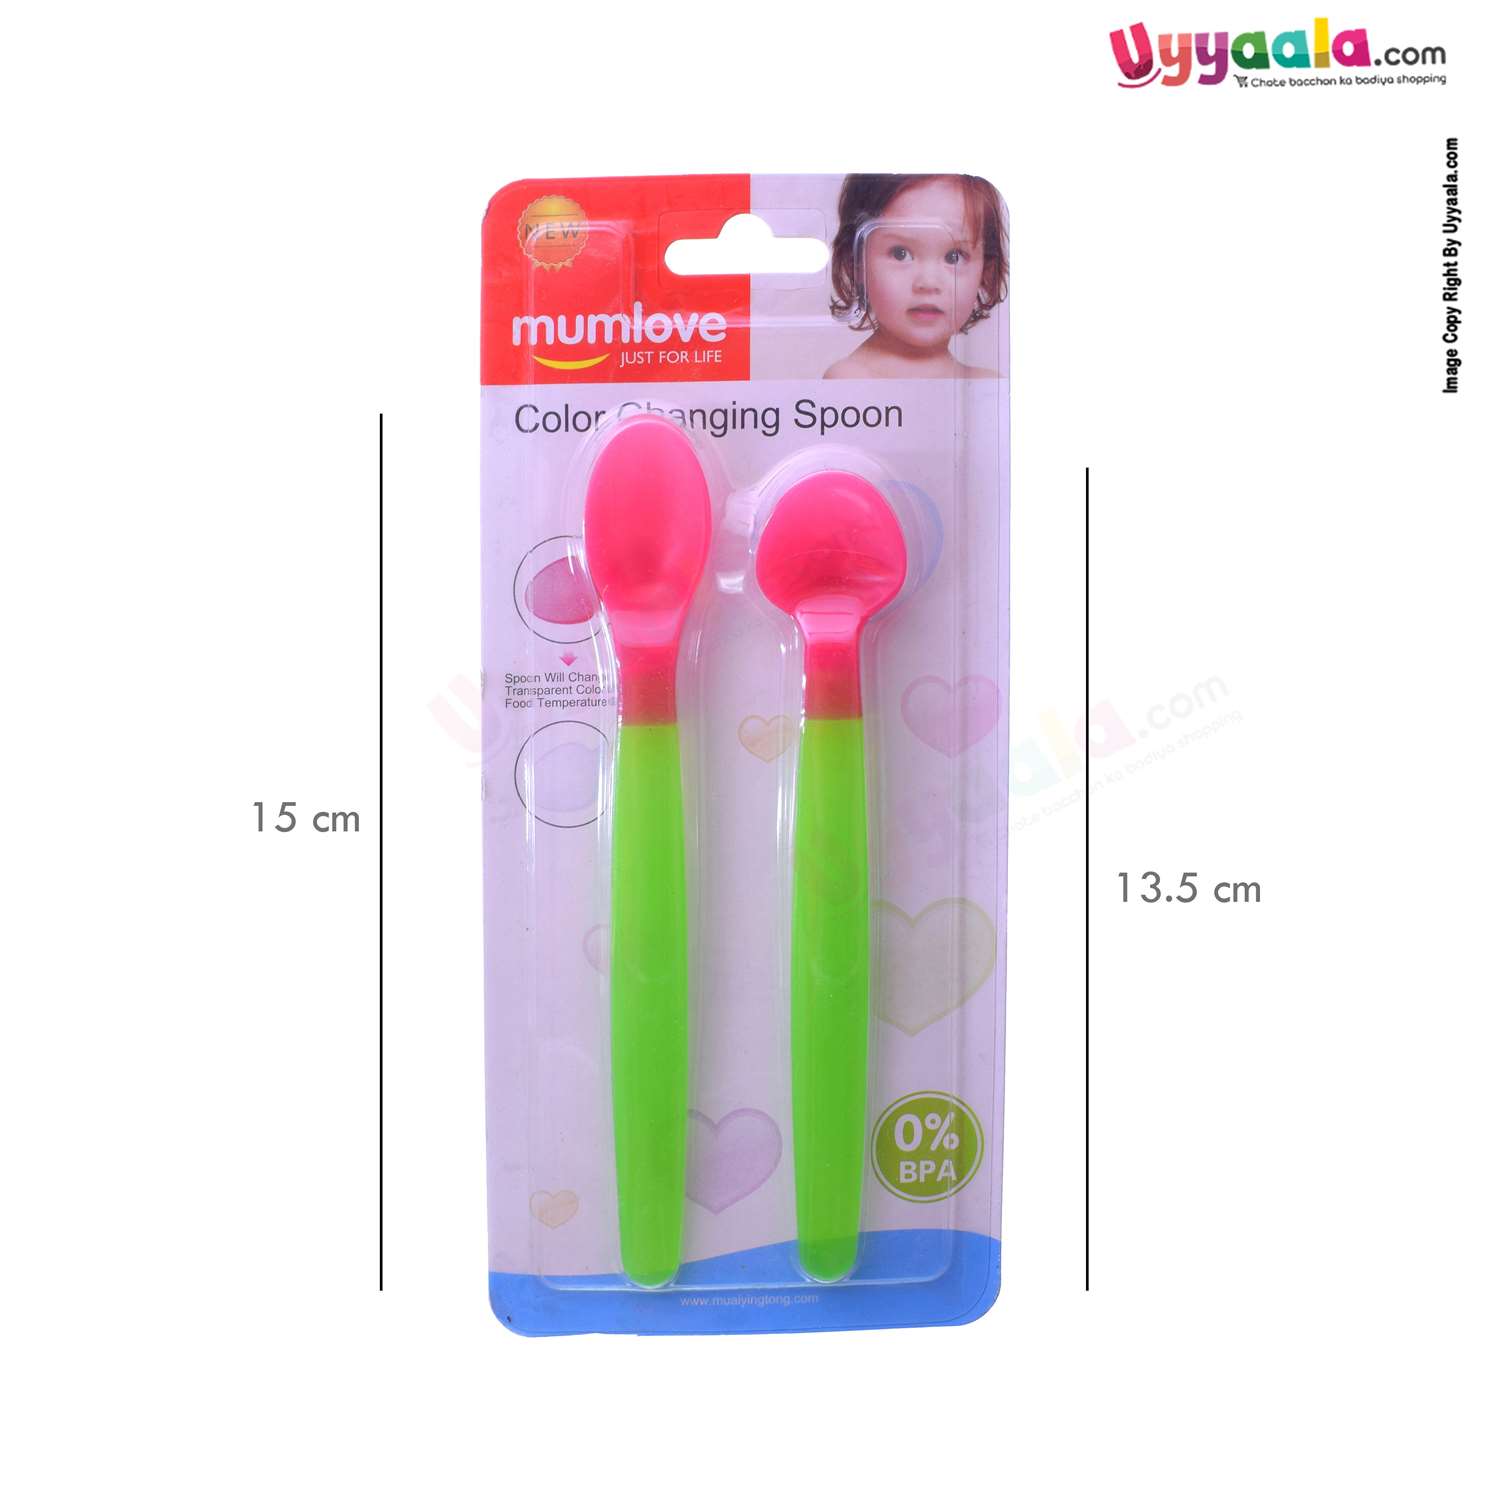 MUMLOVE Color Changing Spoon 4+m Age - Pink, Green